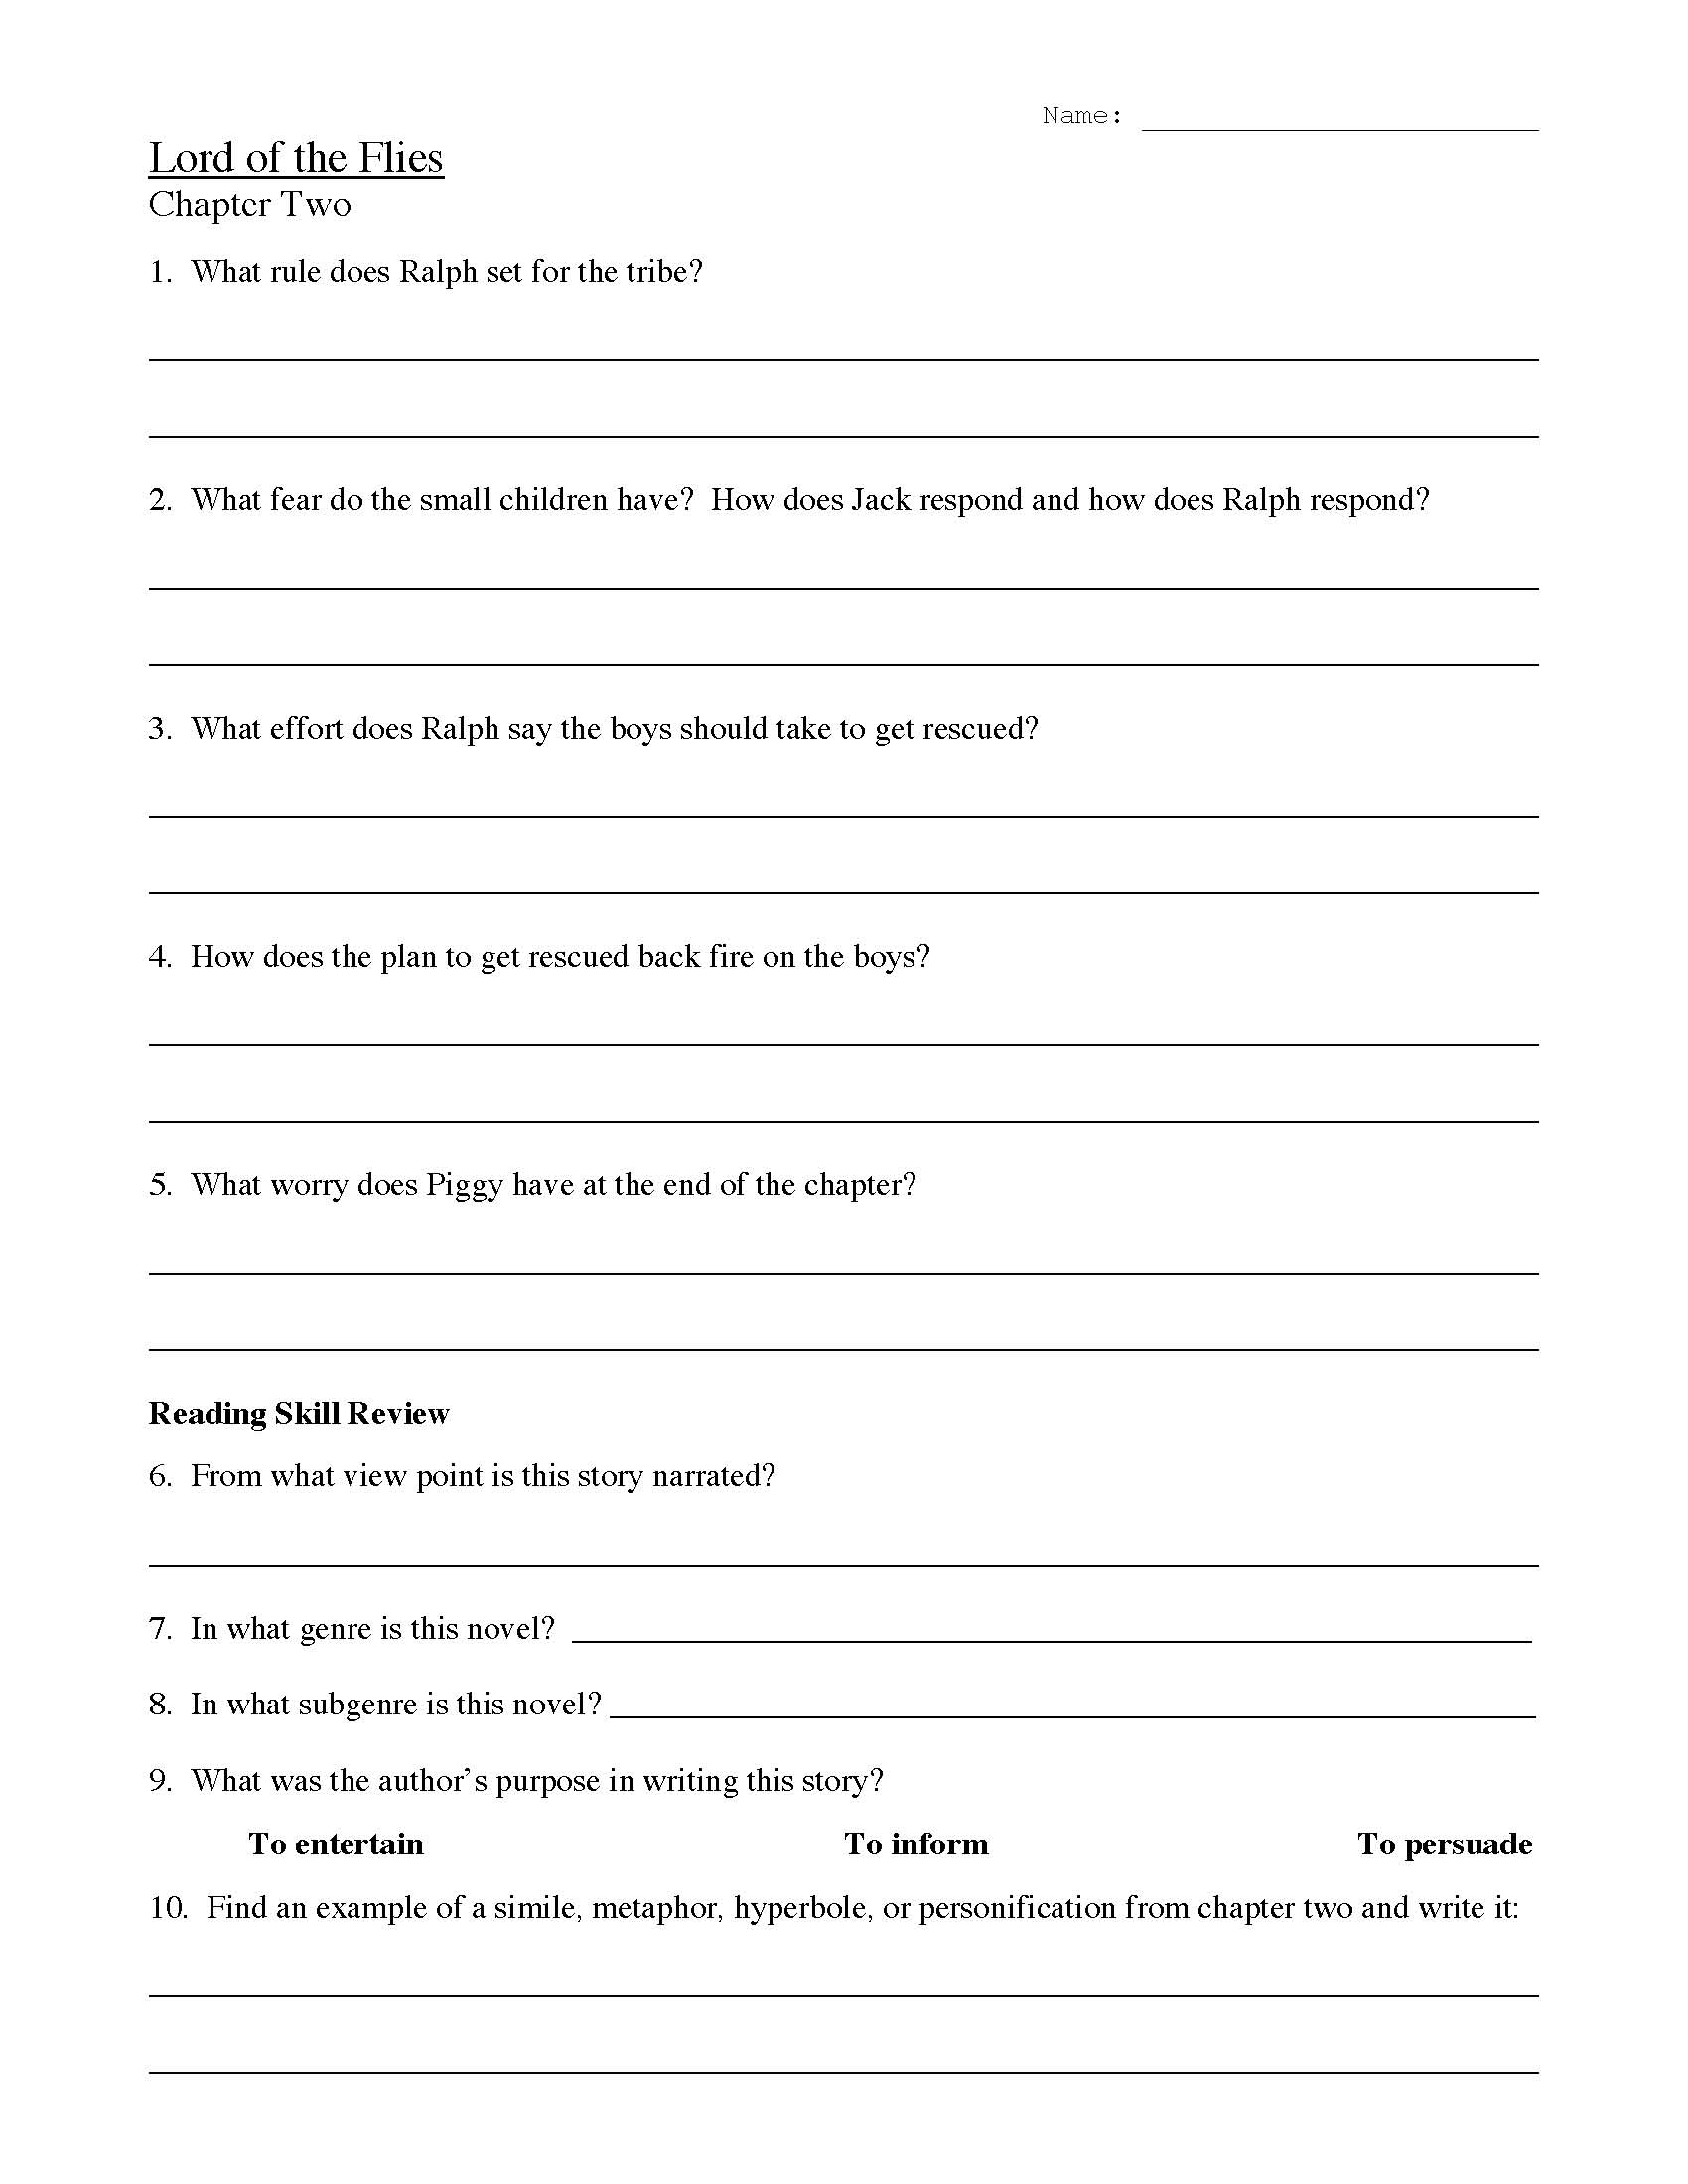 This is a preview image of the Lord of the Flies Chapter Two Worksheet.